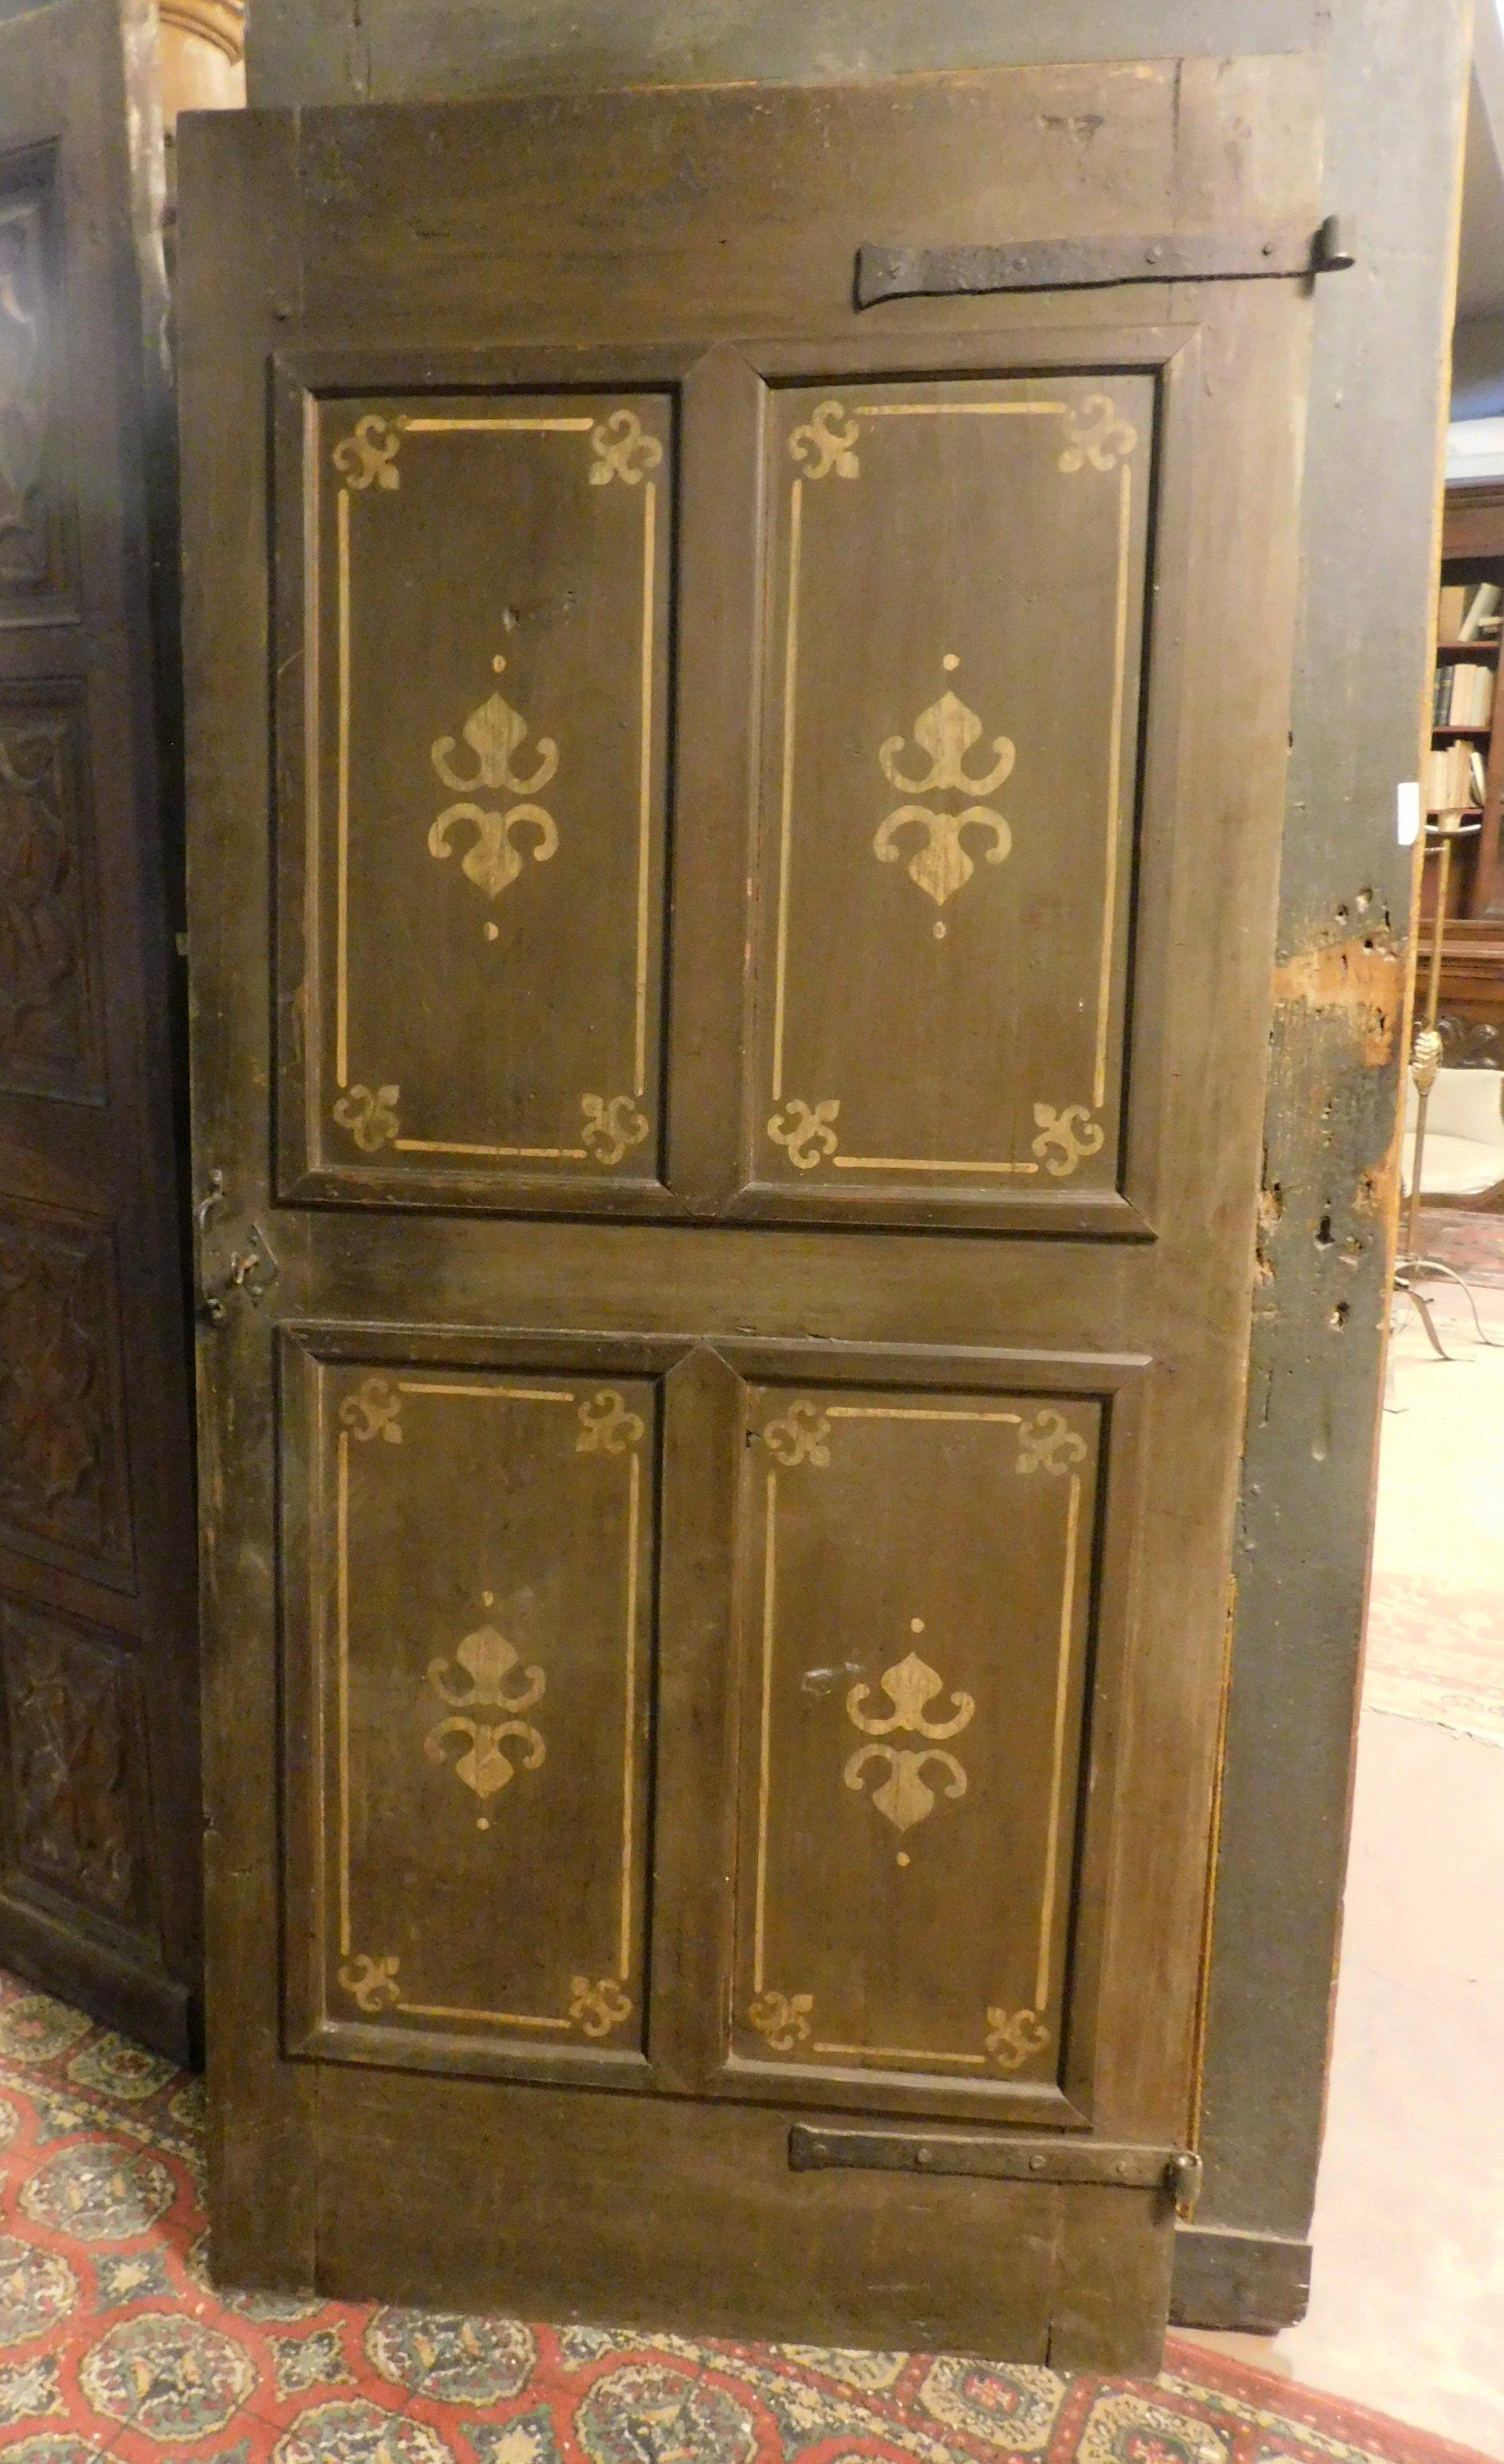 Ancient solid wood door, dark green background with 4 painted panels, mainly rustic style, 19th century, from a home in Italy.
Very fascinating for colors and patina, it still has original irons and is also lacquered on the back, opening to pull to